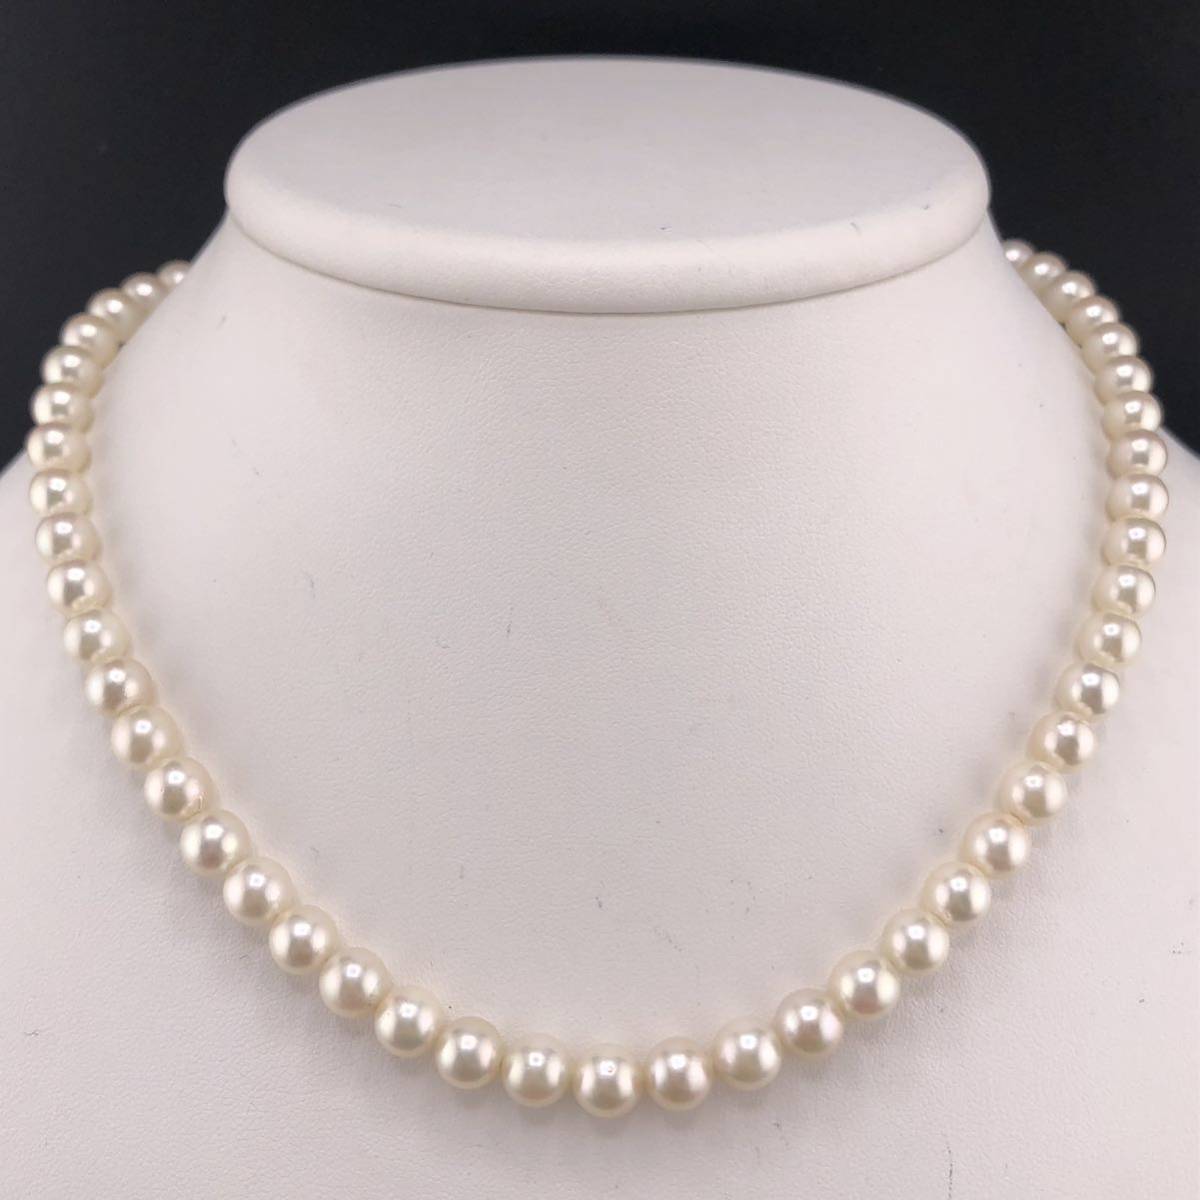 E03-0868☆アコヤパールネックレス 6.5mm~7.0mm 40cm 29g ( アコヤ真珠 Pearl necklace SILVER )